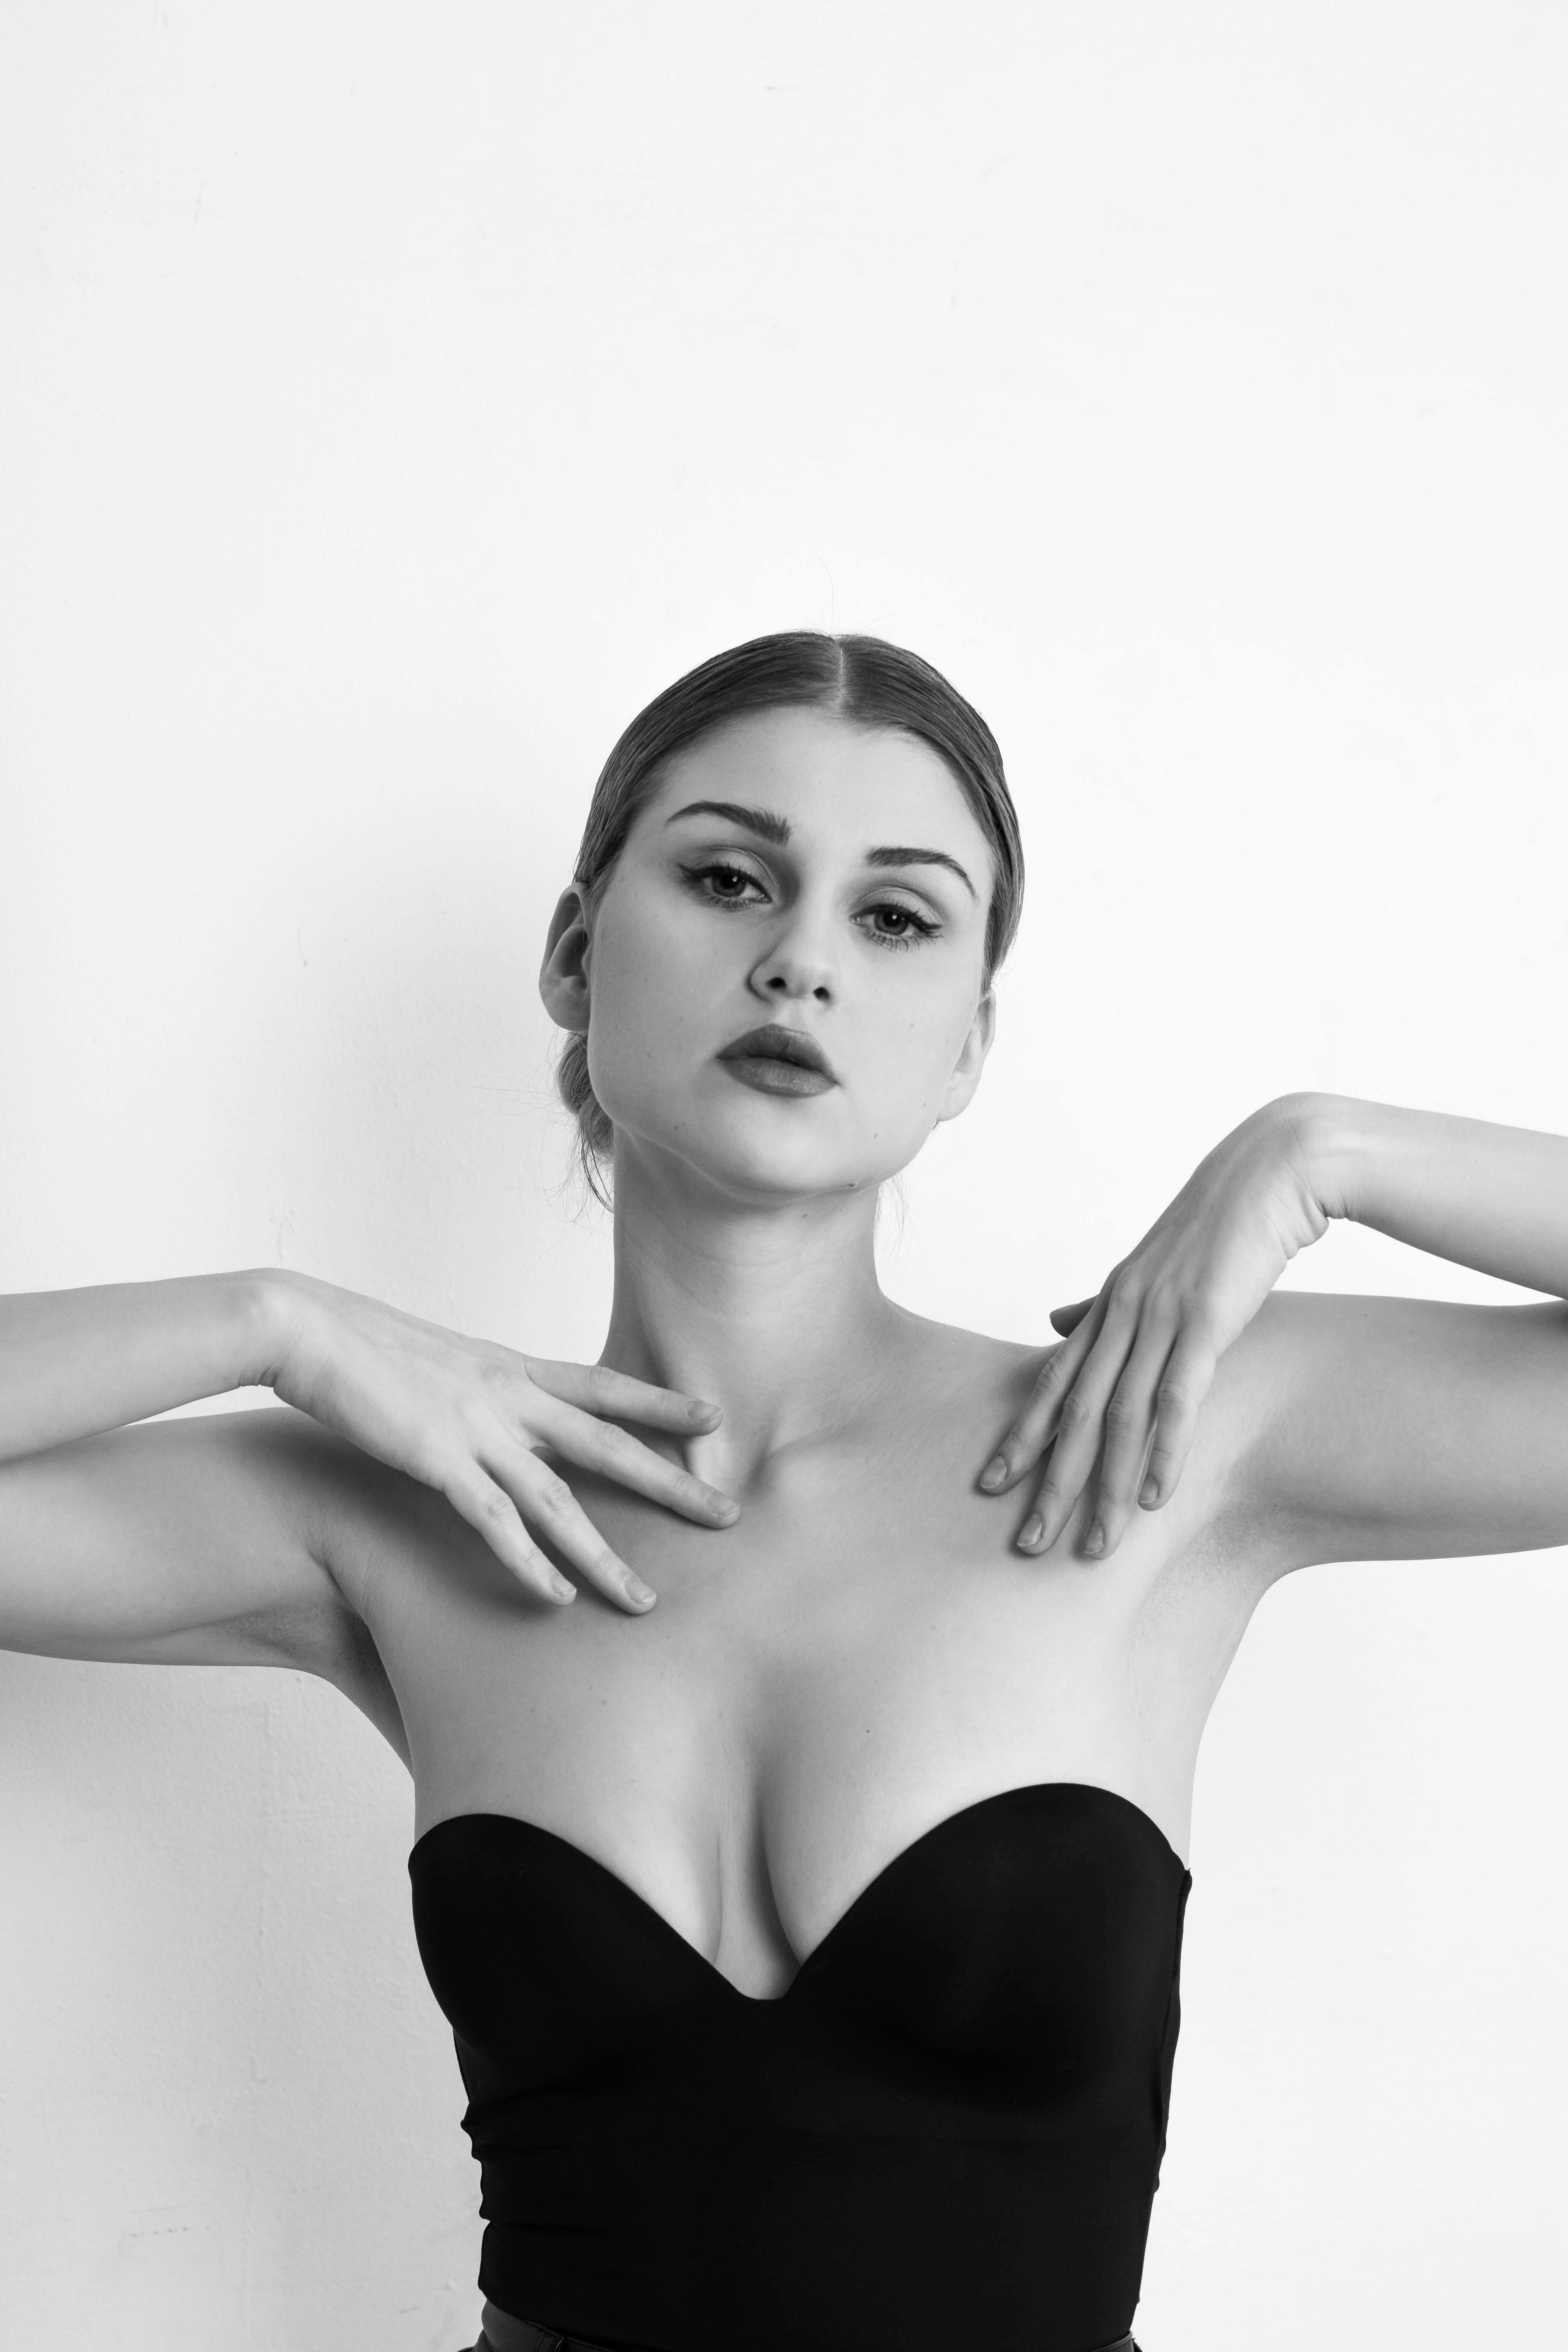 A young woman wearing a strapless top, showing her cleavage | Source: Pexels